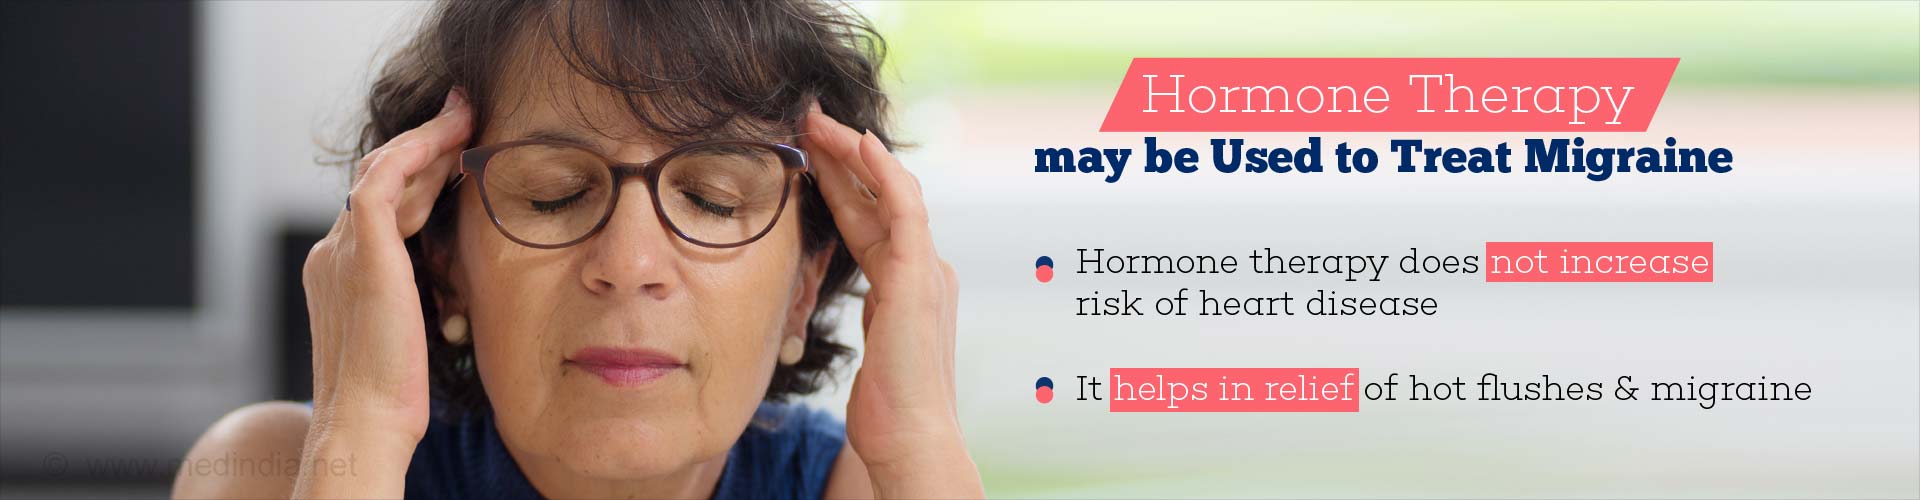 Hormone therapy may be used to treat migraine
- Hormone therapy does not increase risk of heart disease
- It helps in relief of hot flushes & migraines